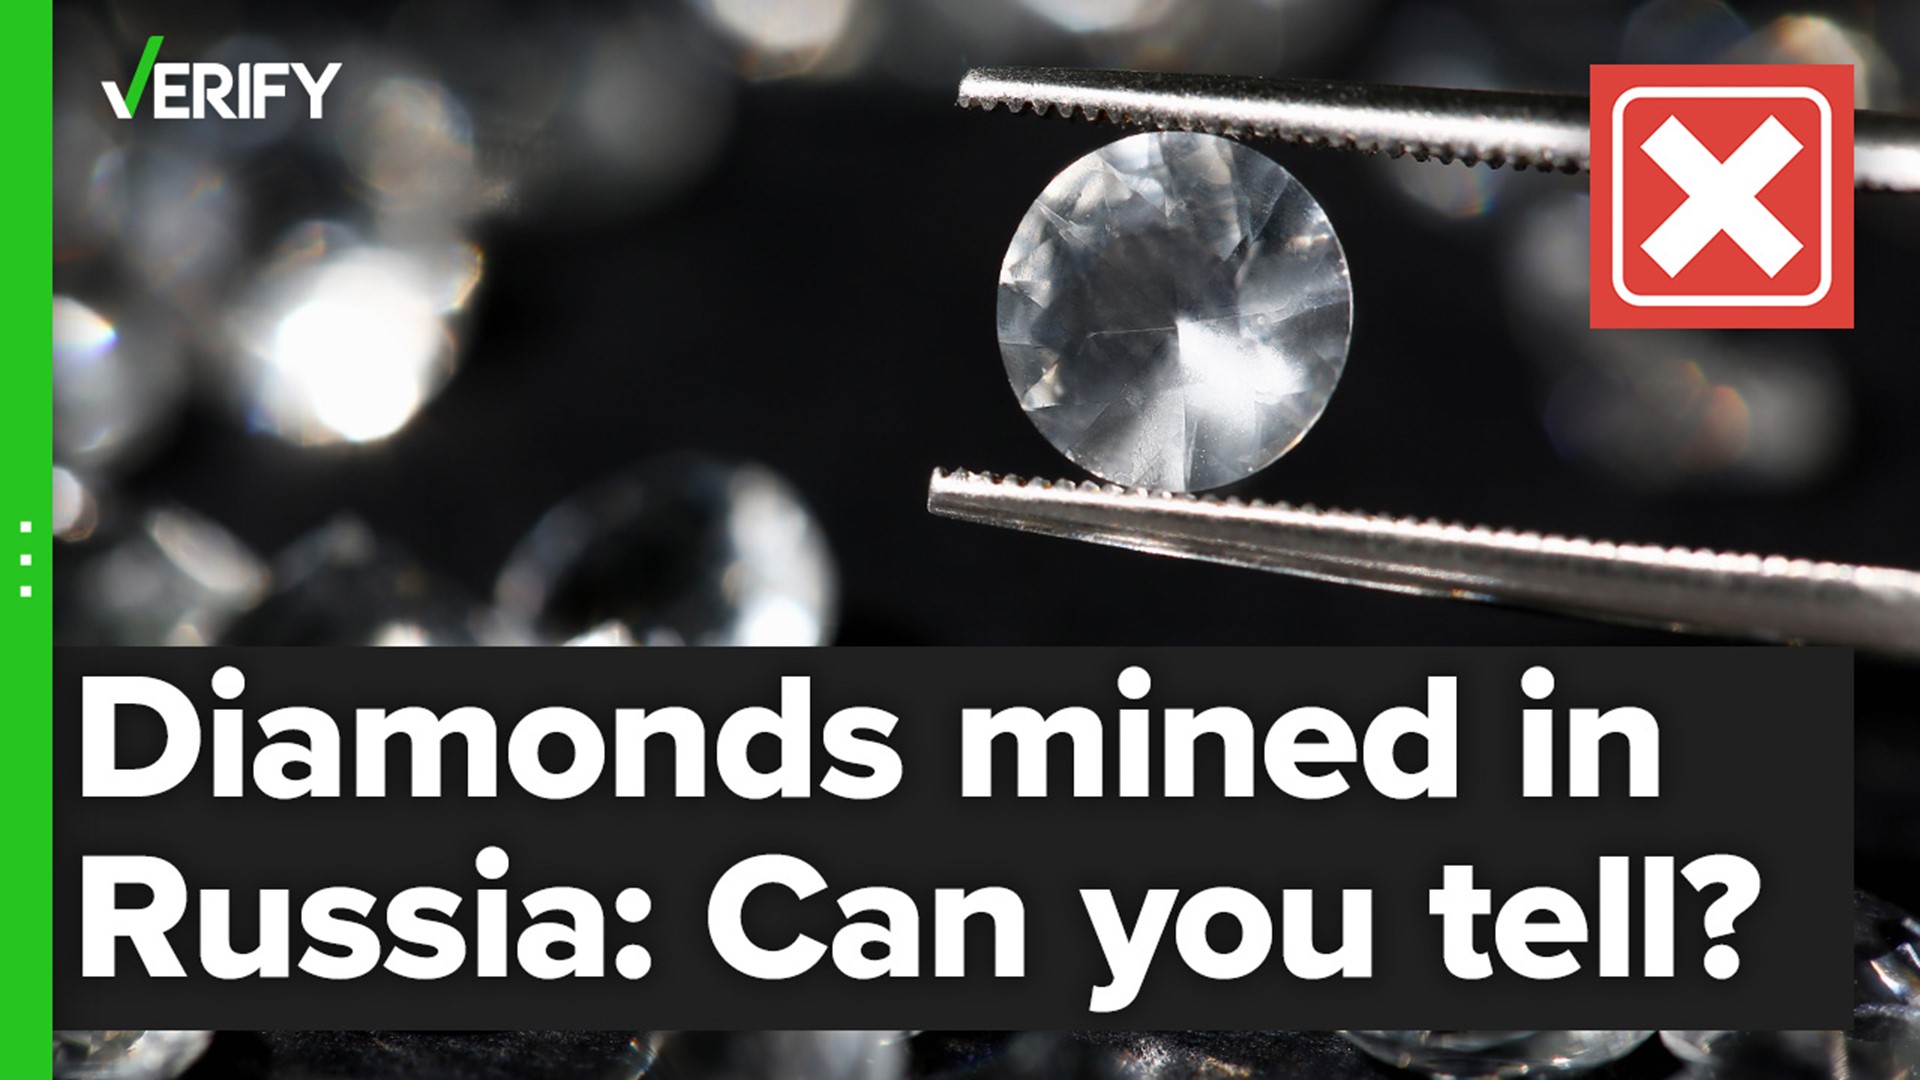 People are calling for a boycott of one of Russia’s largest exports — diamonds. But a diamond’s country of origin is often difficult to determine.